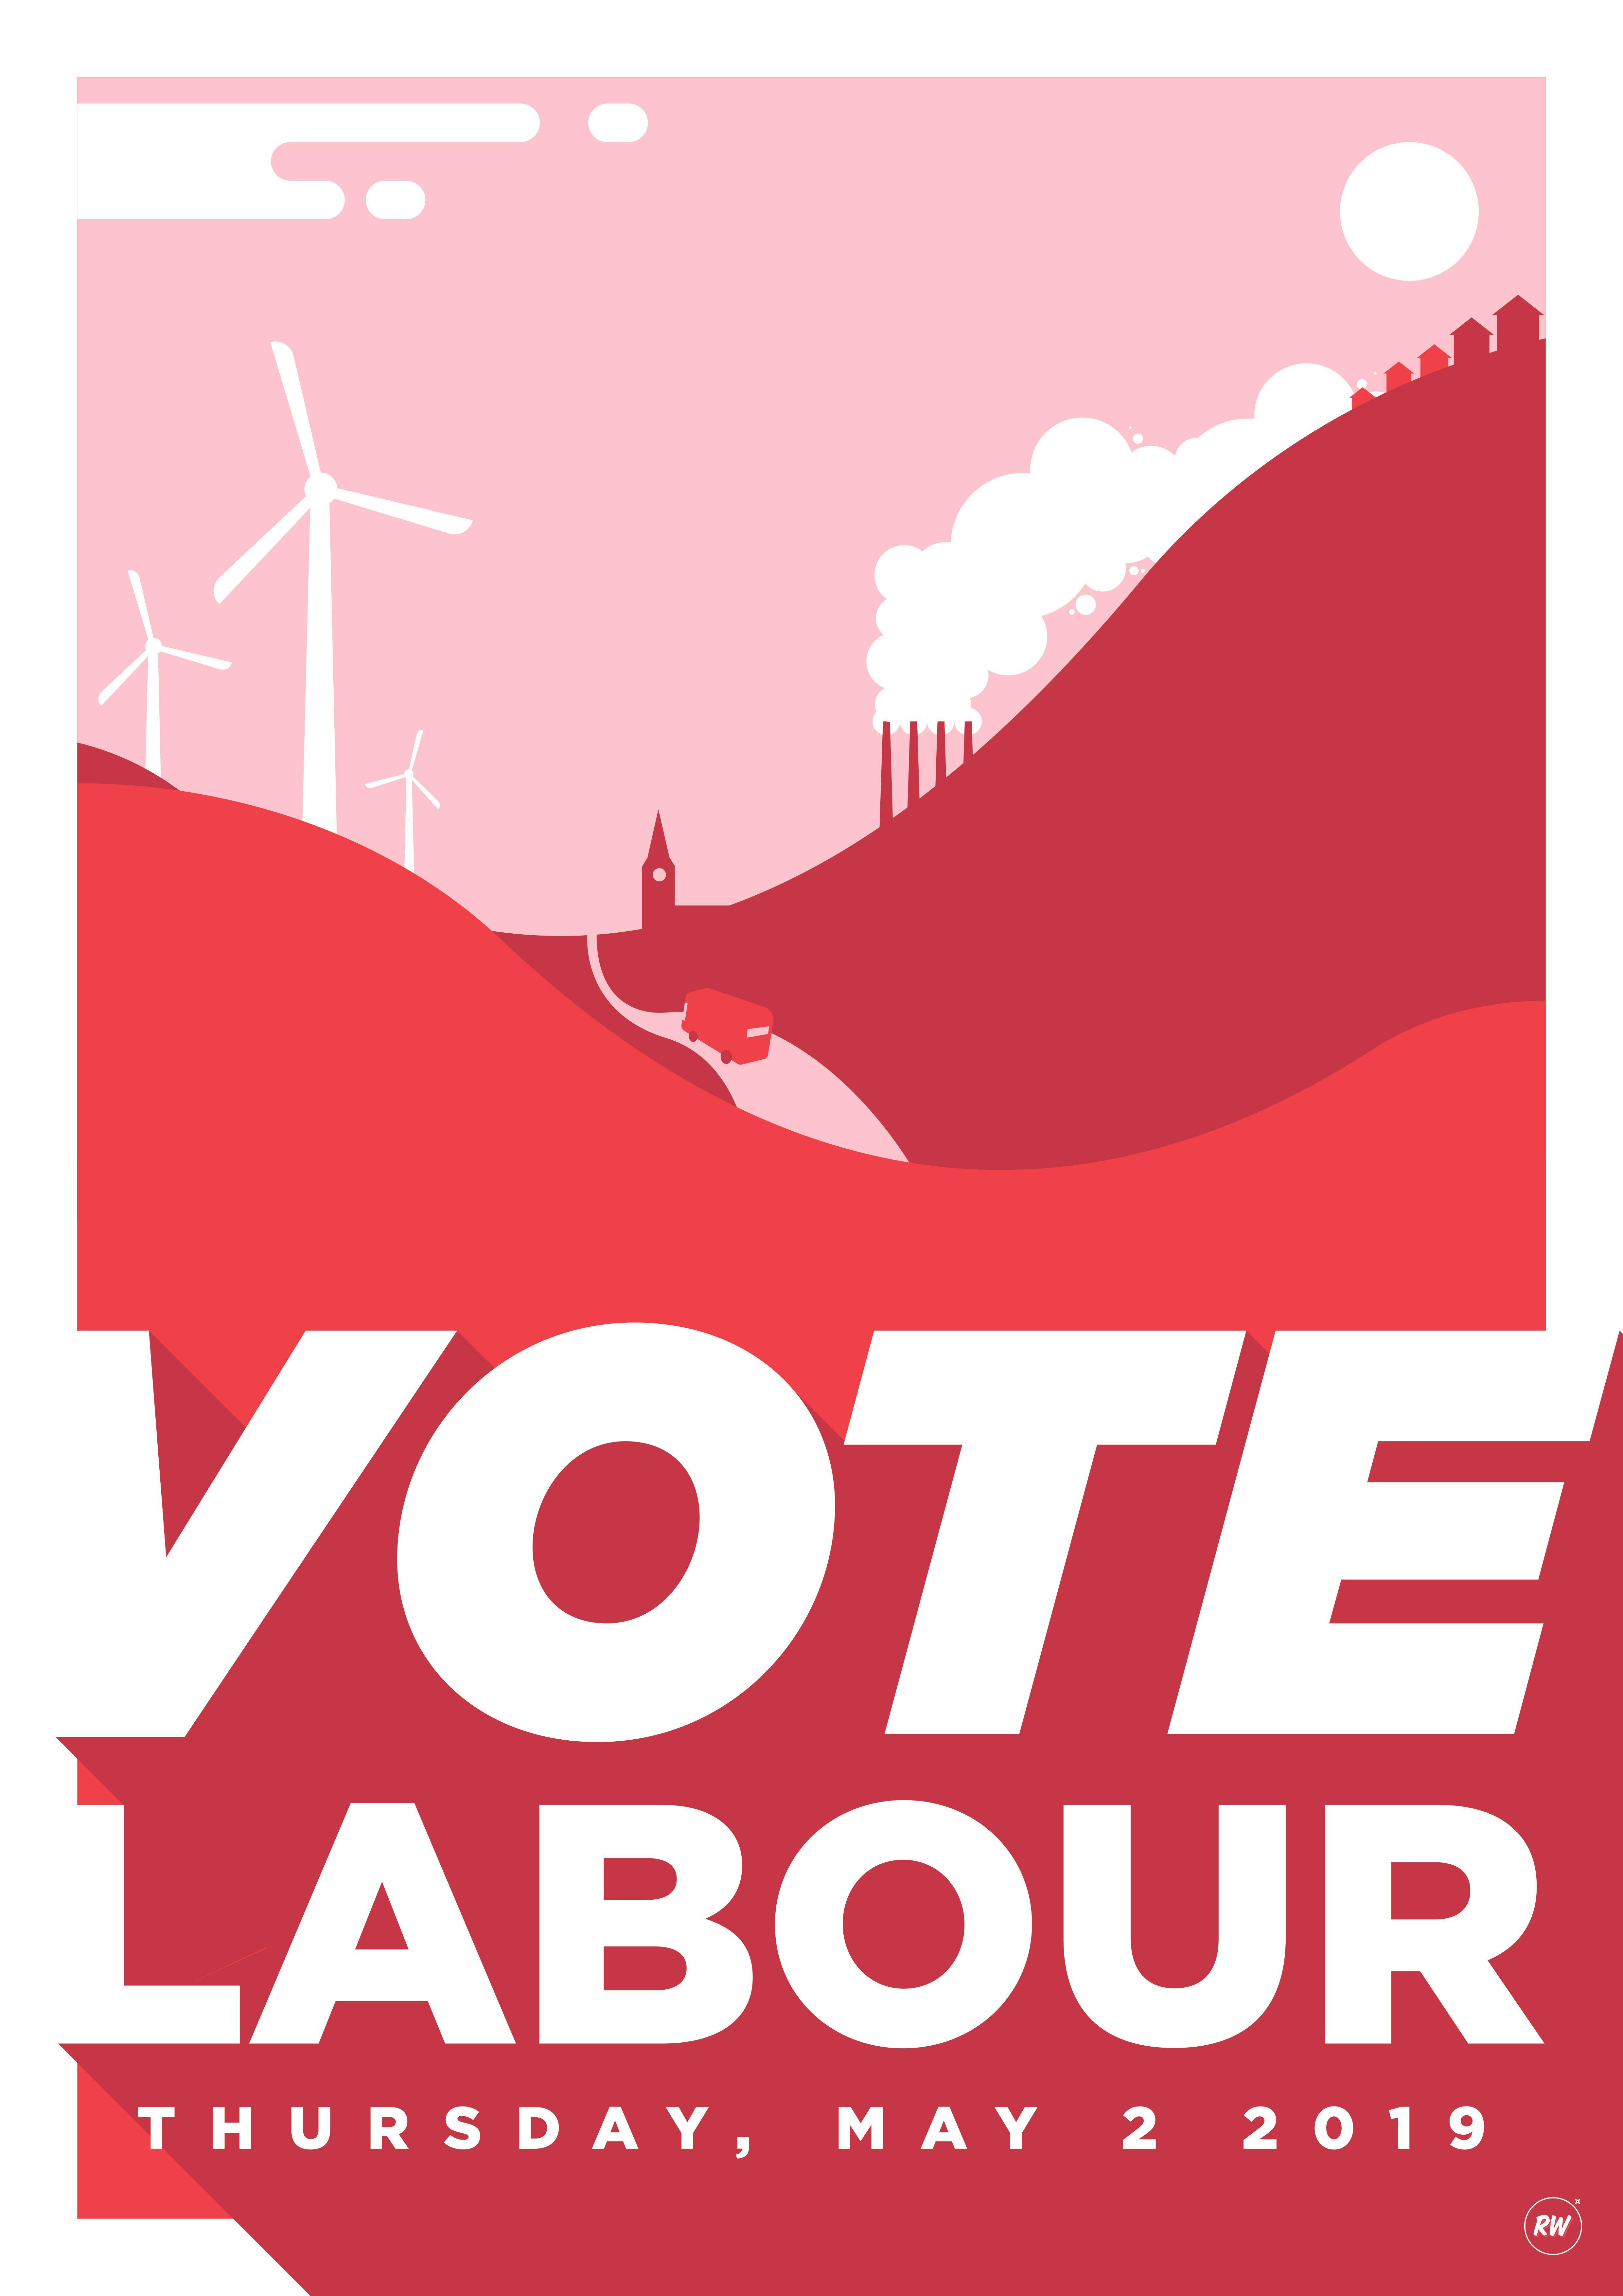 Robin Wilde for Labour Party Graphic Designers